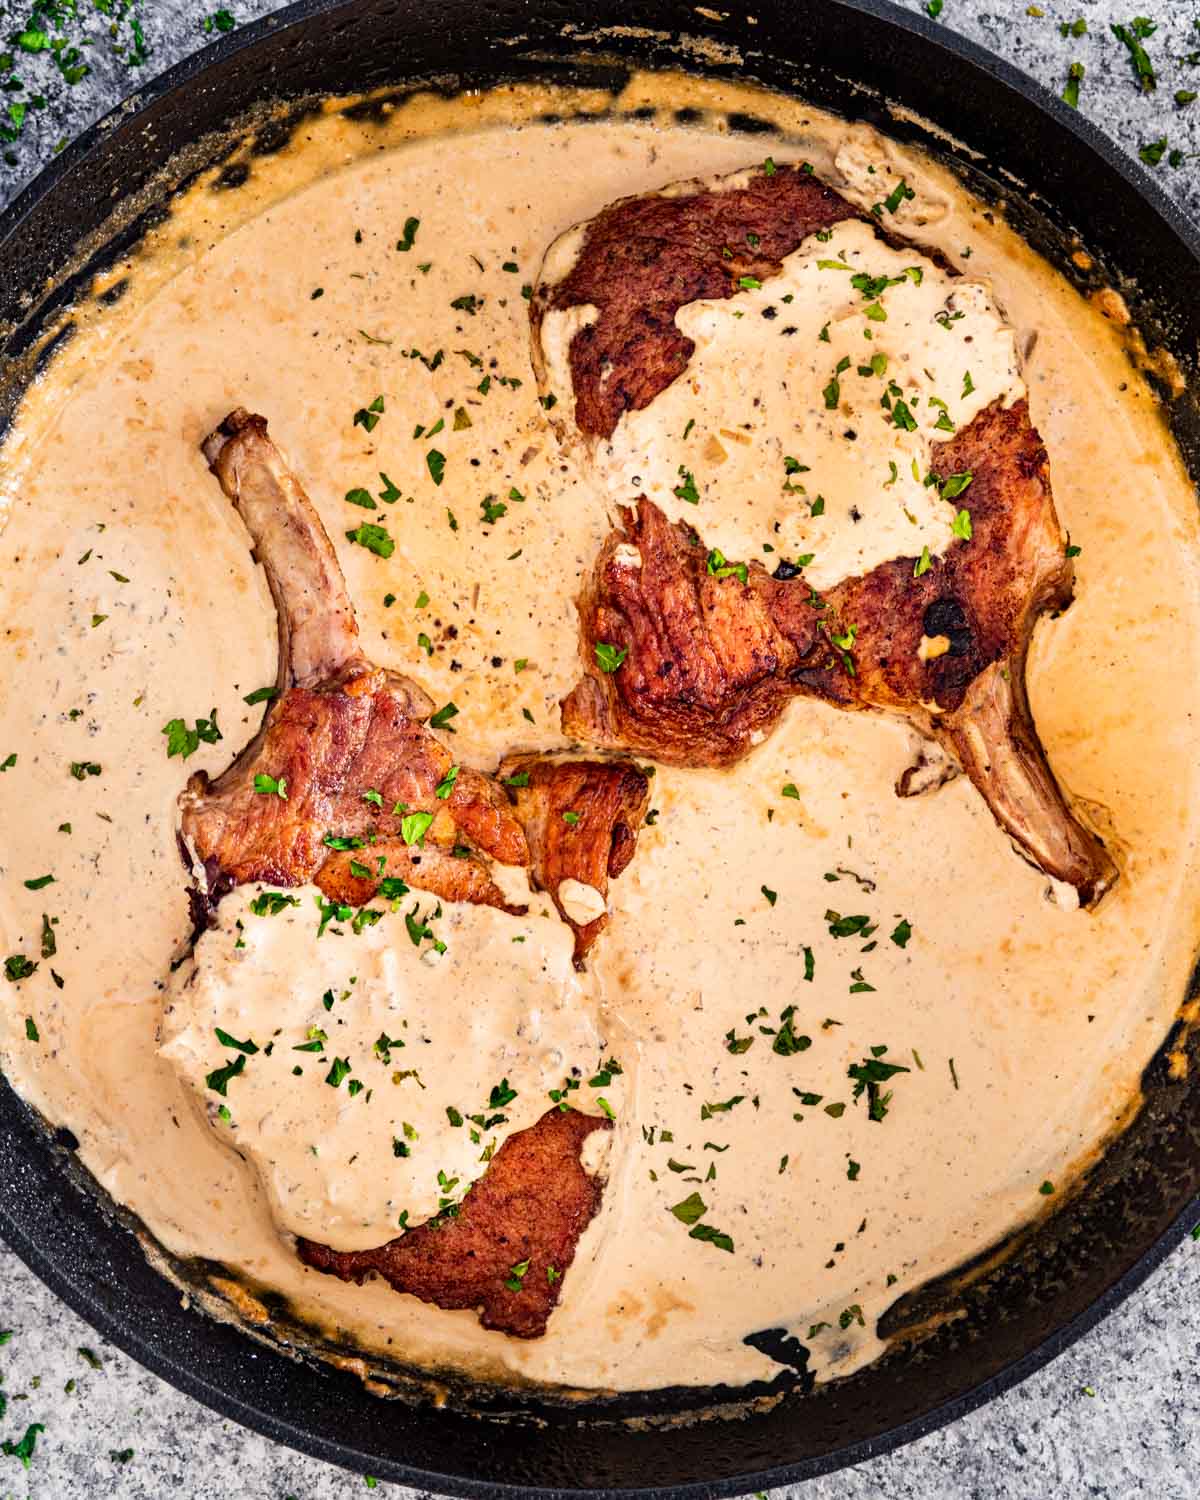 pork chops with peppercorn sauce in a black skillet garnished with parsley.